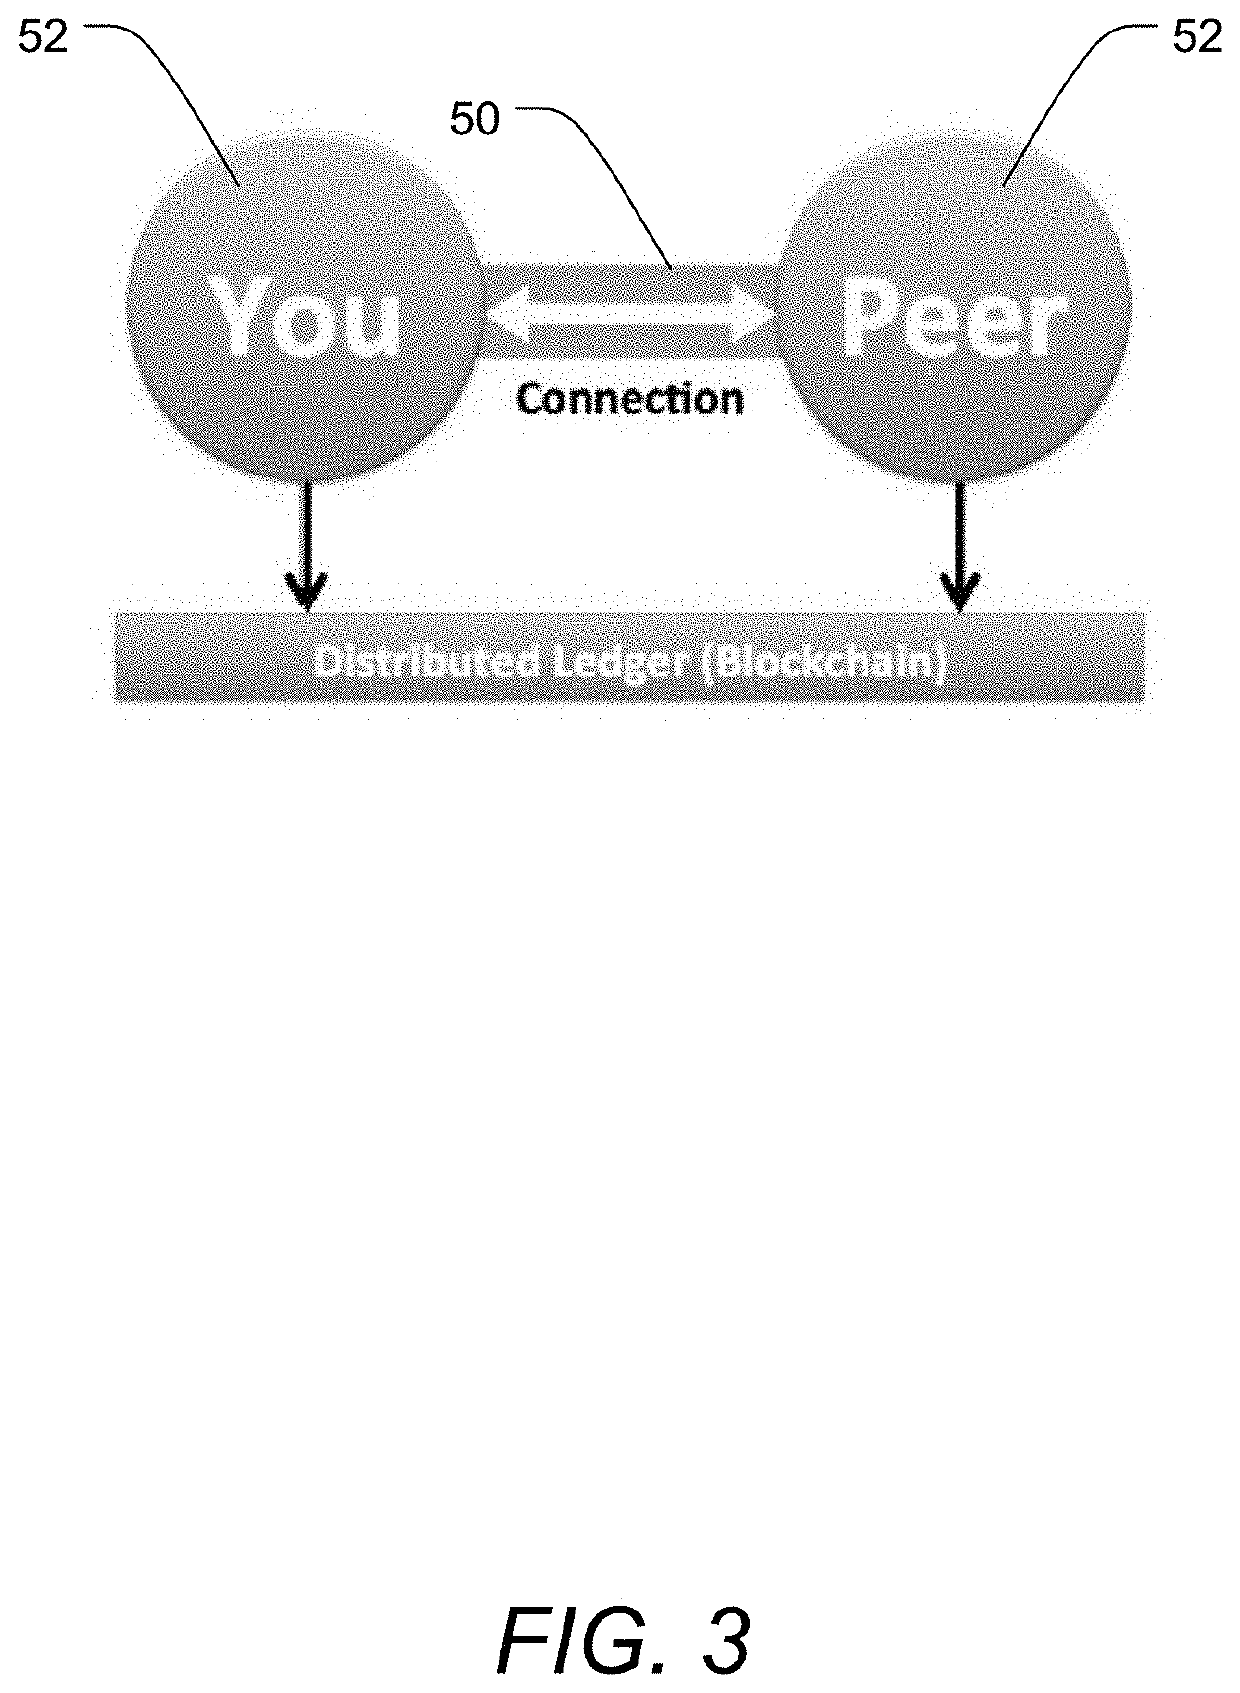 Decentralized Customer-Controlled Credit Verification